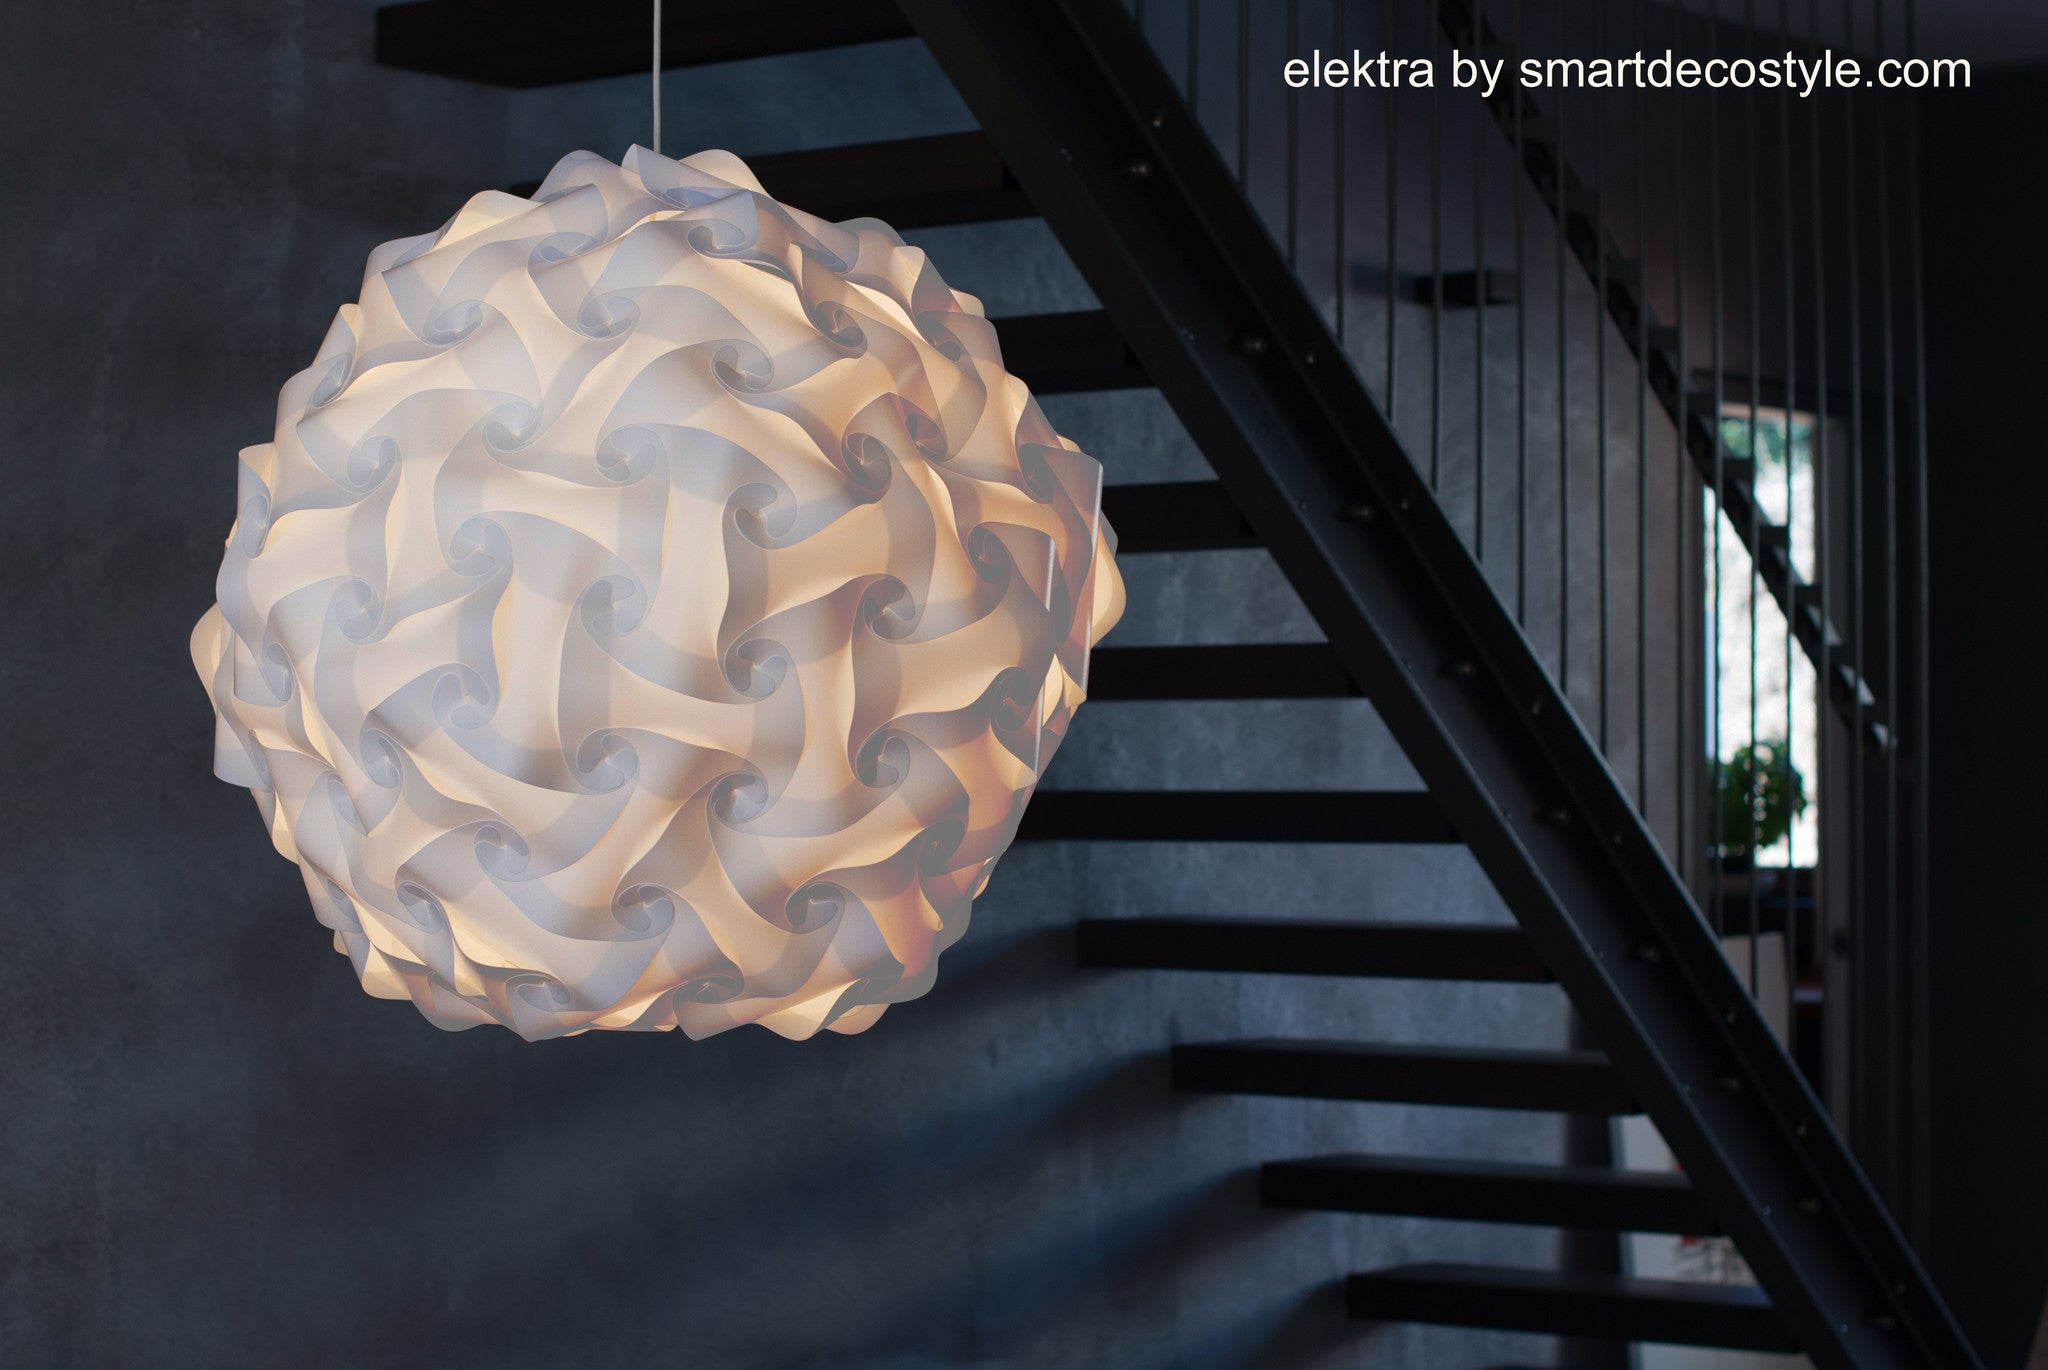 Smarty Lamps Elektra Ceiling Light Shade  Smart Deco Homeware Lighting and Art by Jacqueline hammond